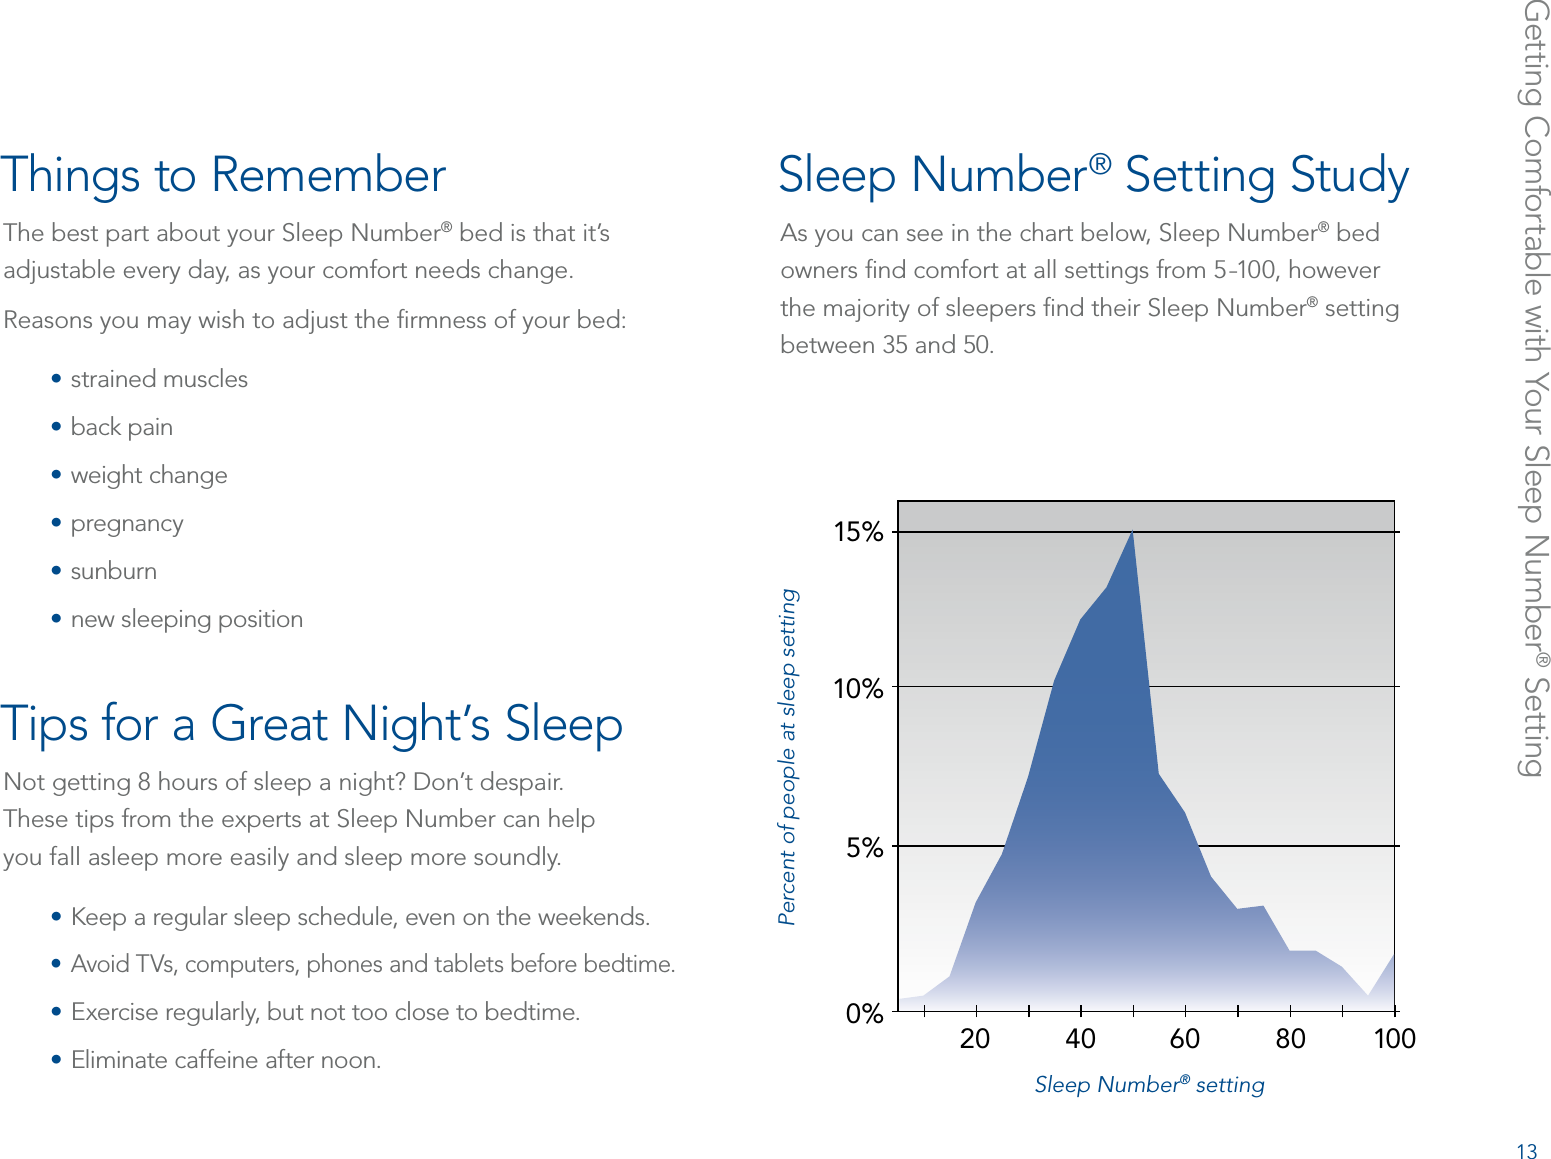 Getting Comfortable with Your Sleep Number® SettingSleep Number® Setting StudyAs you can see in the chart below, Sleep Number® bed  owners ﬁnd comfort at all settings from 5-100, however  the majority of sleepers ﬁnd their Sleep Number® setting  between 35 and 50.Things to RememberThe best part about your Sleep Number® bed is that it’s adjustable every day, as your comfort needs change.Reasons you may wish to adjust the ﬁrmness of your bed: • strained muscles• back pain• weight change• pregnancy• sunburn• new sleeping positionTips for a Great Night’s SleepNot getting 8 hours of sleep a night? Don’t despair.  These tips from the experts at Sleep Number can help  you fall asleep more easily and sleep more soundly.• Keep a regular sleep schedule, even on the weekends.• Avoid TVs, computers, phones and tablets before bedtime.• Exercise regularly, but not too close to bedtime.• Eliminate caffeine after noon.0% 5% 10% 15% 20  40  60  80  100 Percent of people at sleep settingSleep Number® setting13